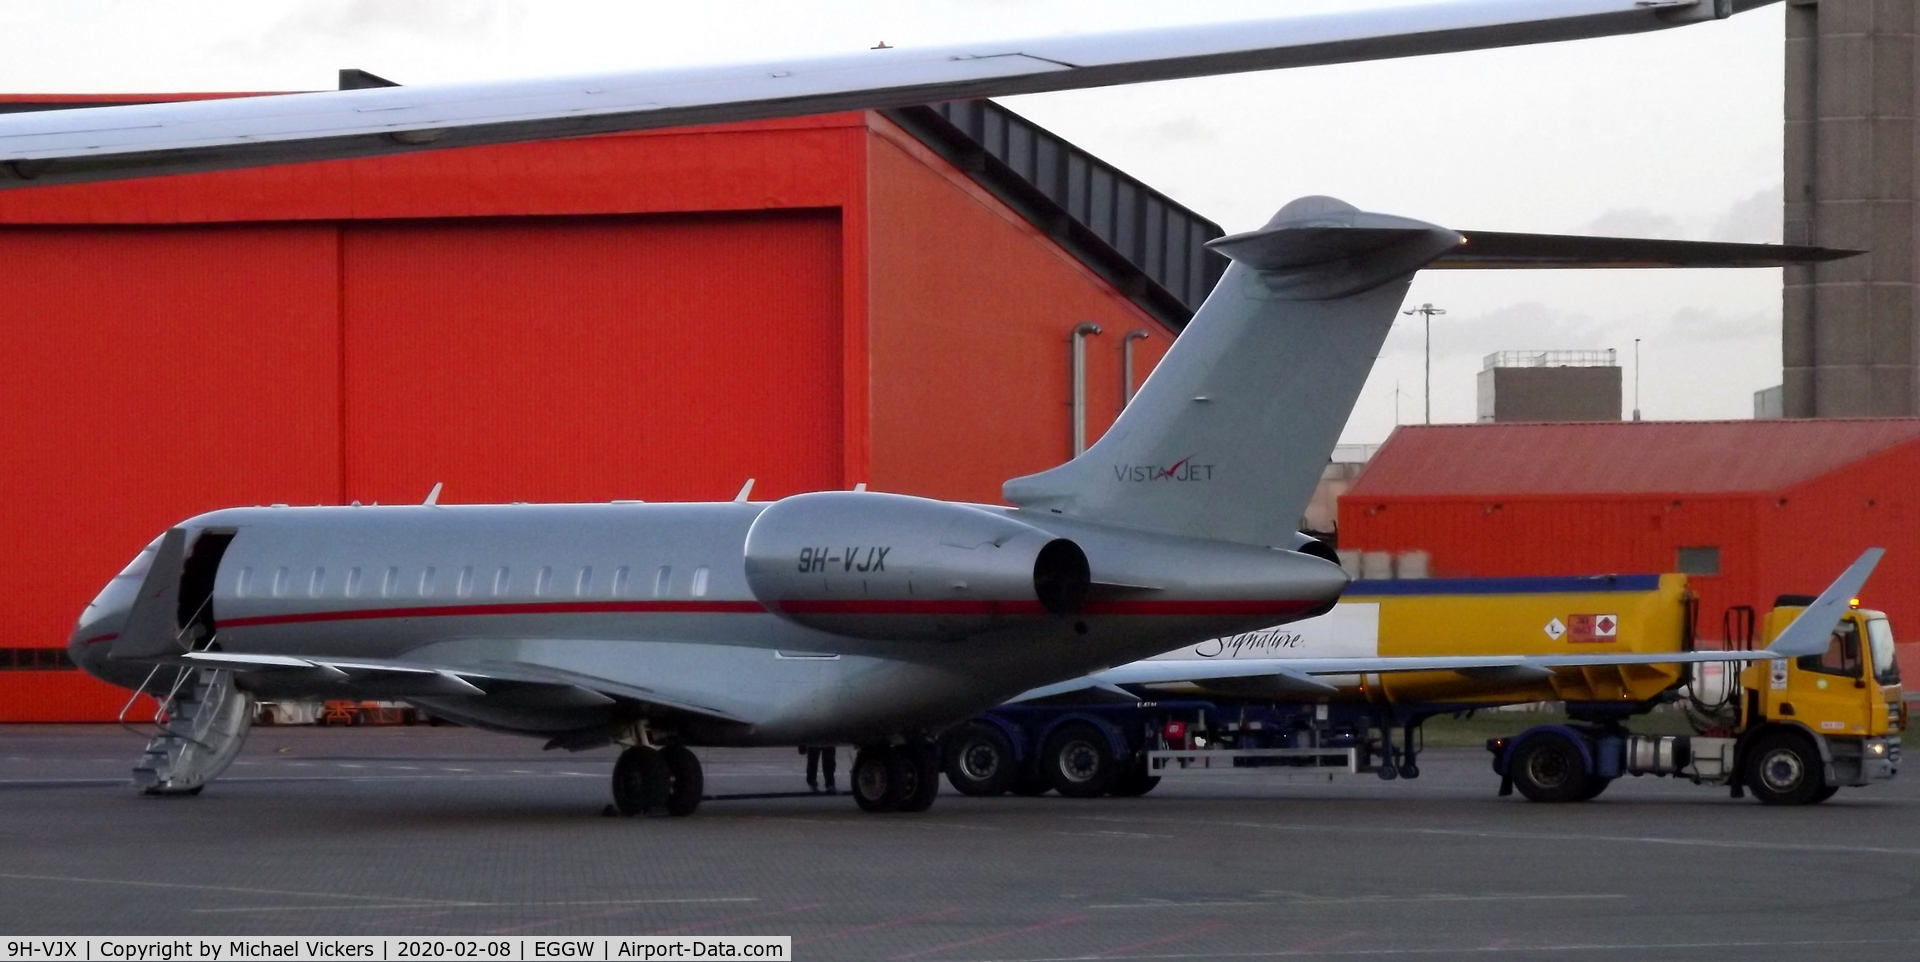 9H-VJX, 2015 Bombardier BD-700-1A10 Global 6000 C/N 9738, parked on signature ramp